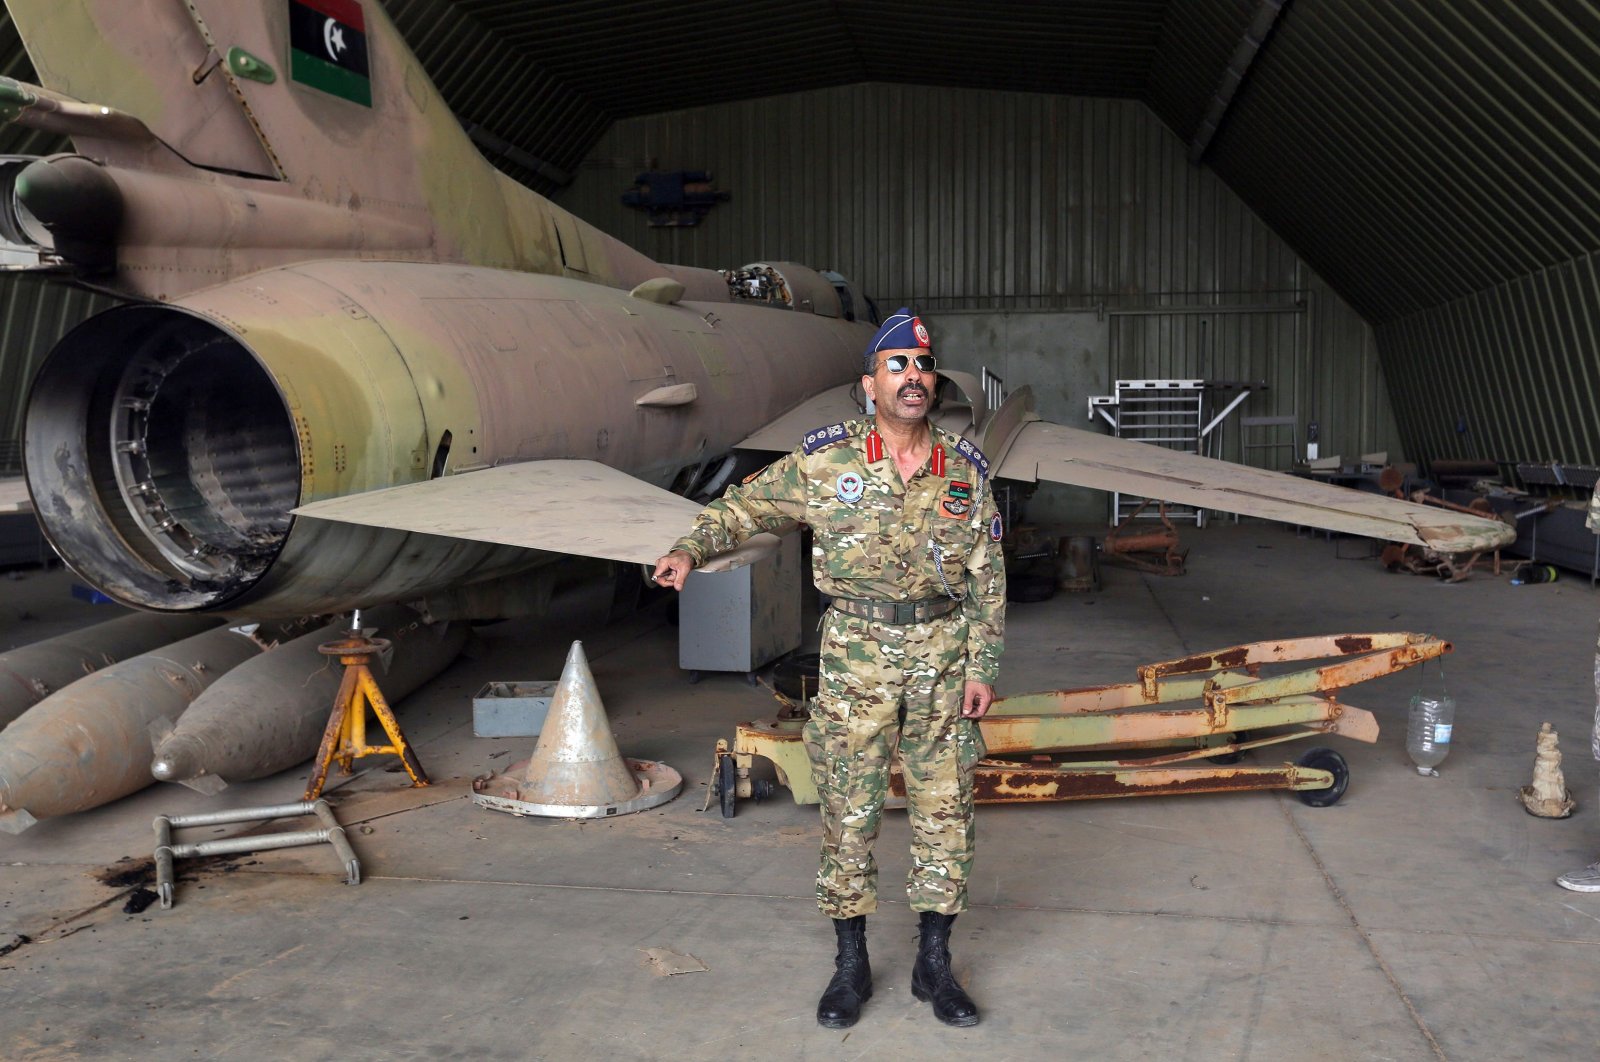 Group Captain Muhammad Qanunu, the military spokesperson of the U.N.-recognized Government of National Accord (GNA) forces, stands by a partially disassembled MiG 23 aircraft, after seizing al-Watiya air base from Haftar on May 18, 2020. (AFP Photo)